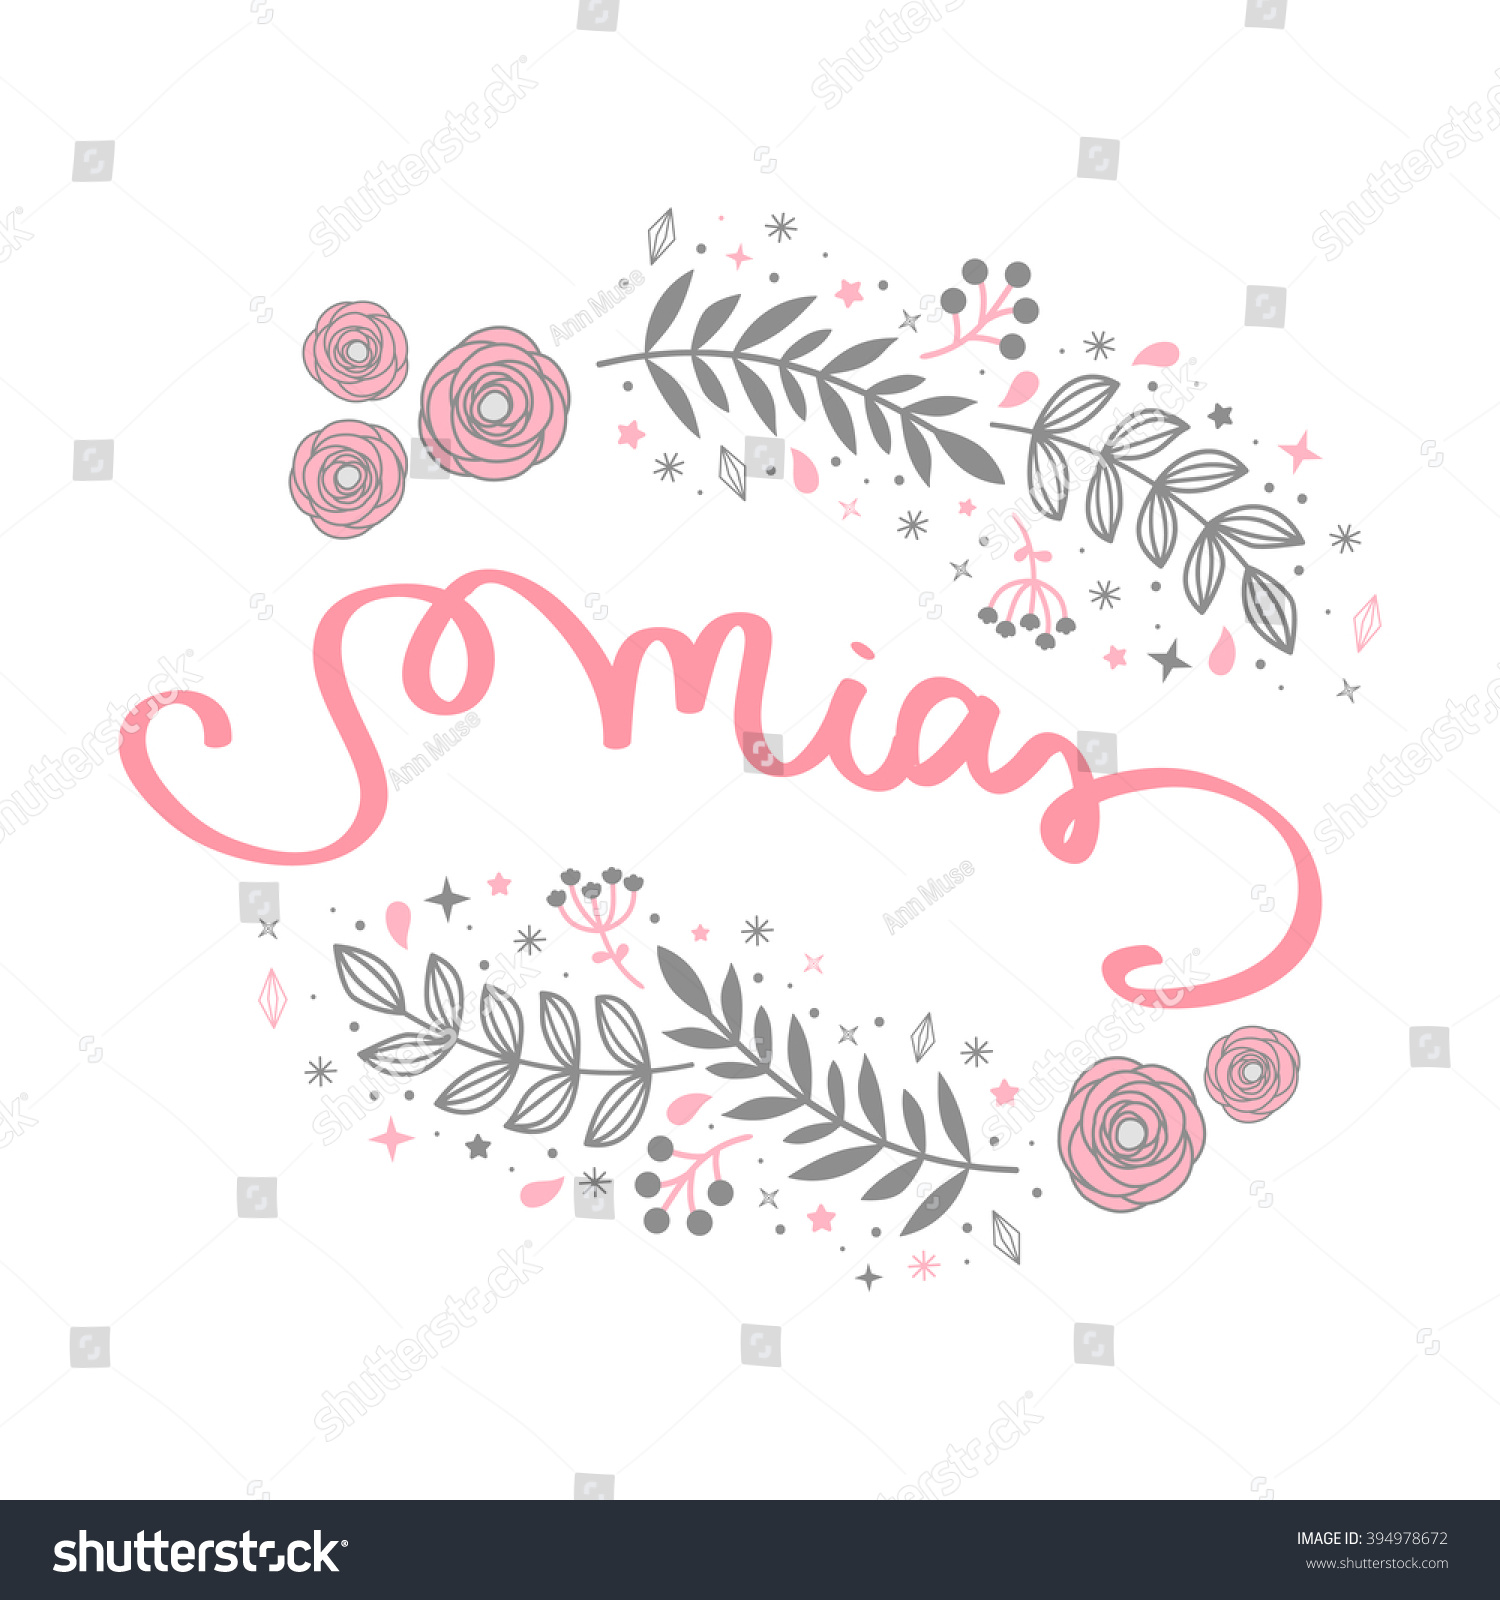 Girl Name Mia Calligraphy Lettering Cute Stock Vector 394978672